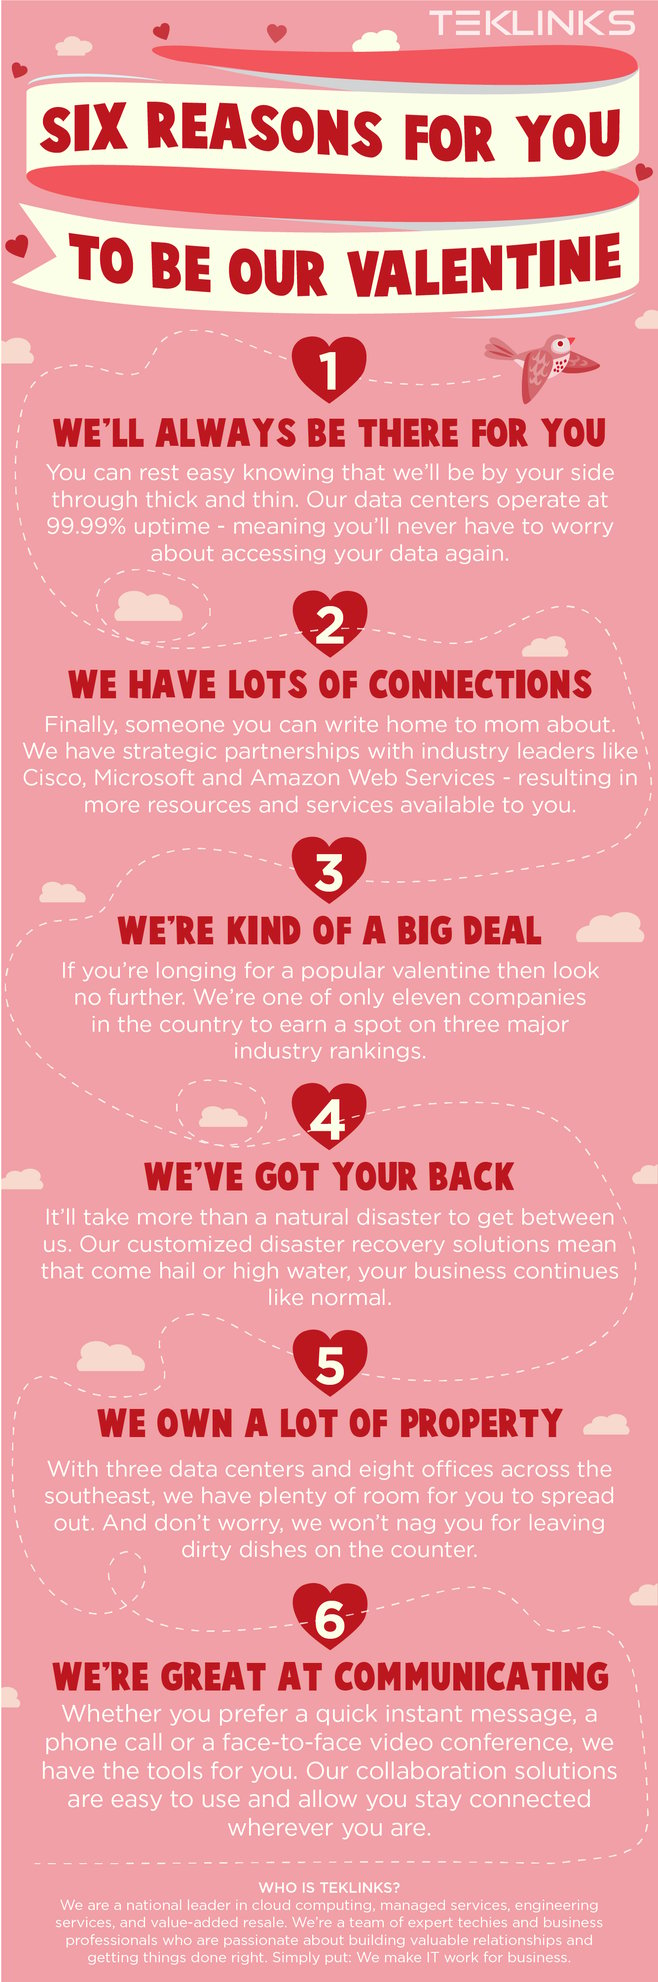 Six reasons for you to be our valentine.